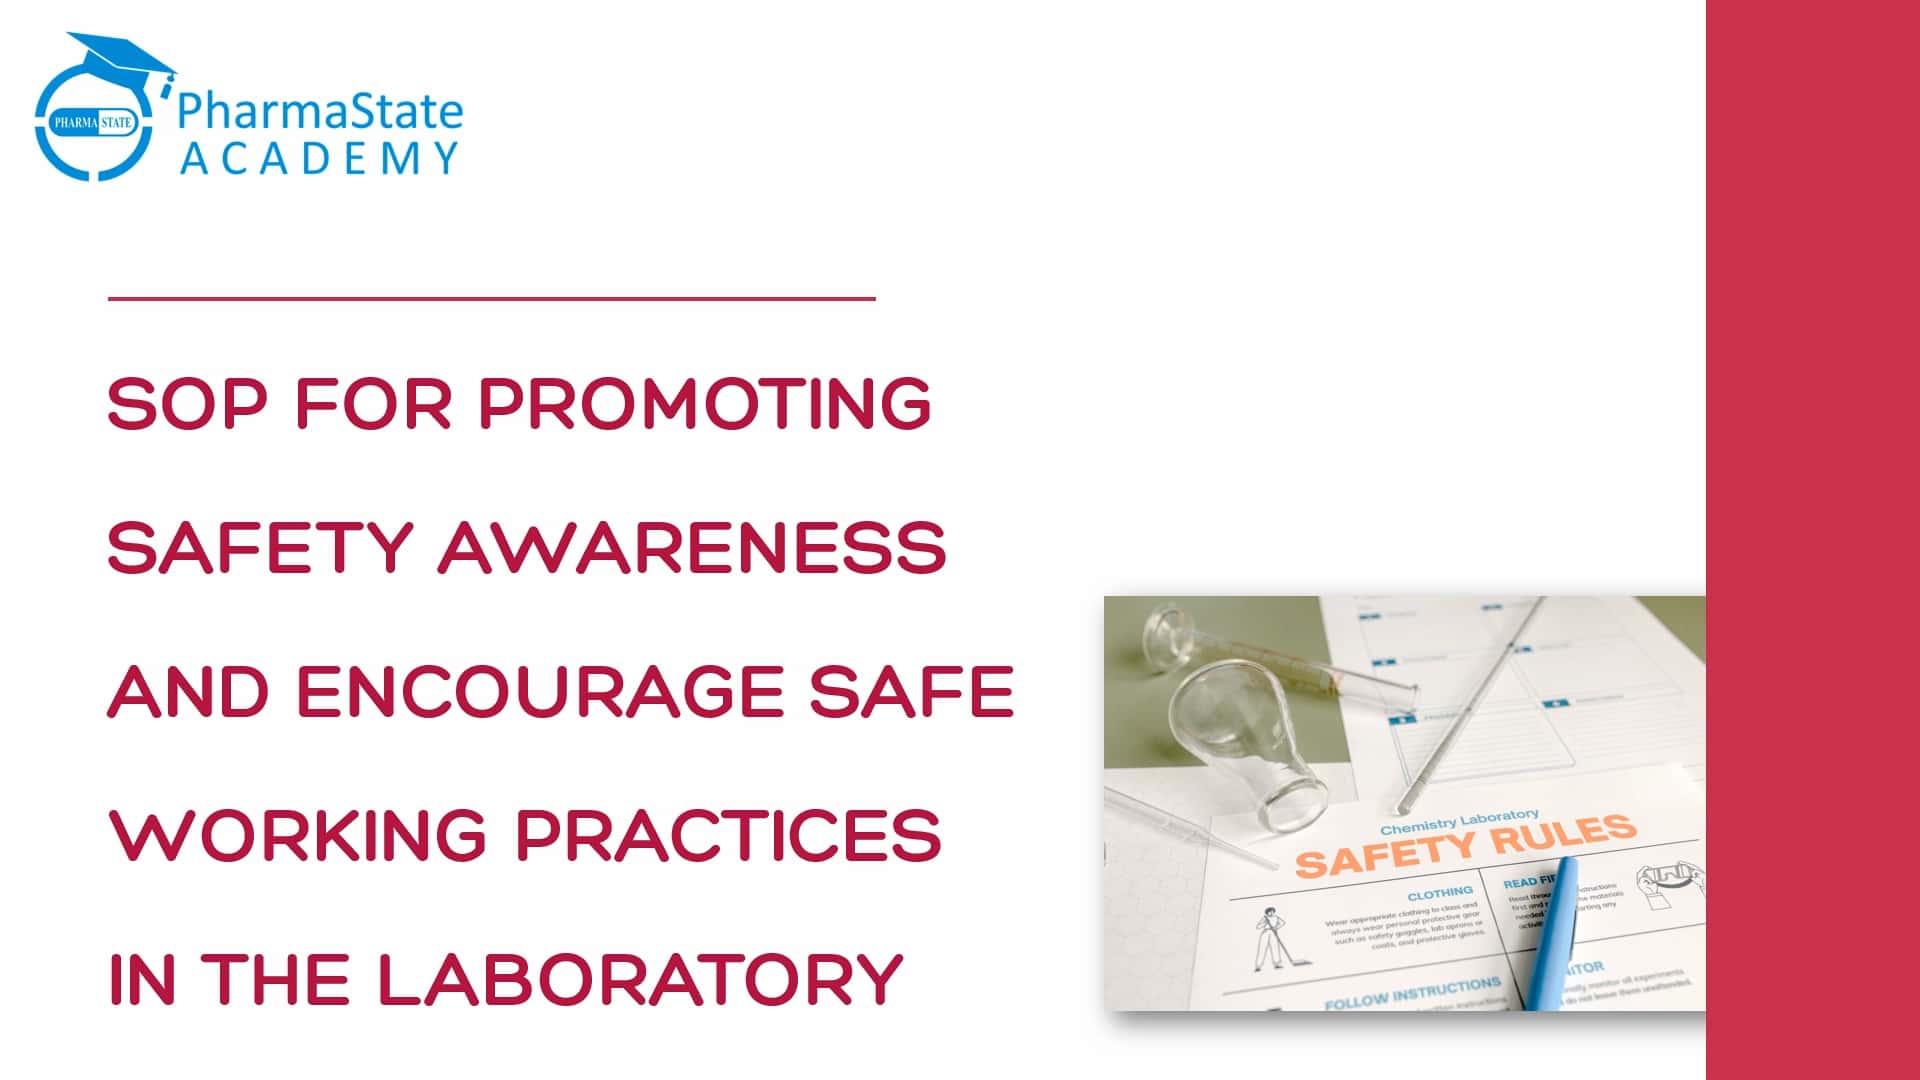 SOP For Promoting Safety Awareness And Encourage Safe Working Practices in The Laboratory